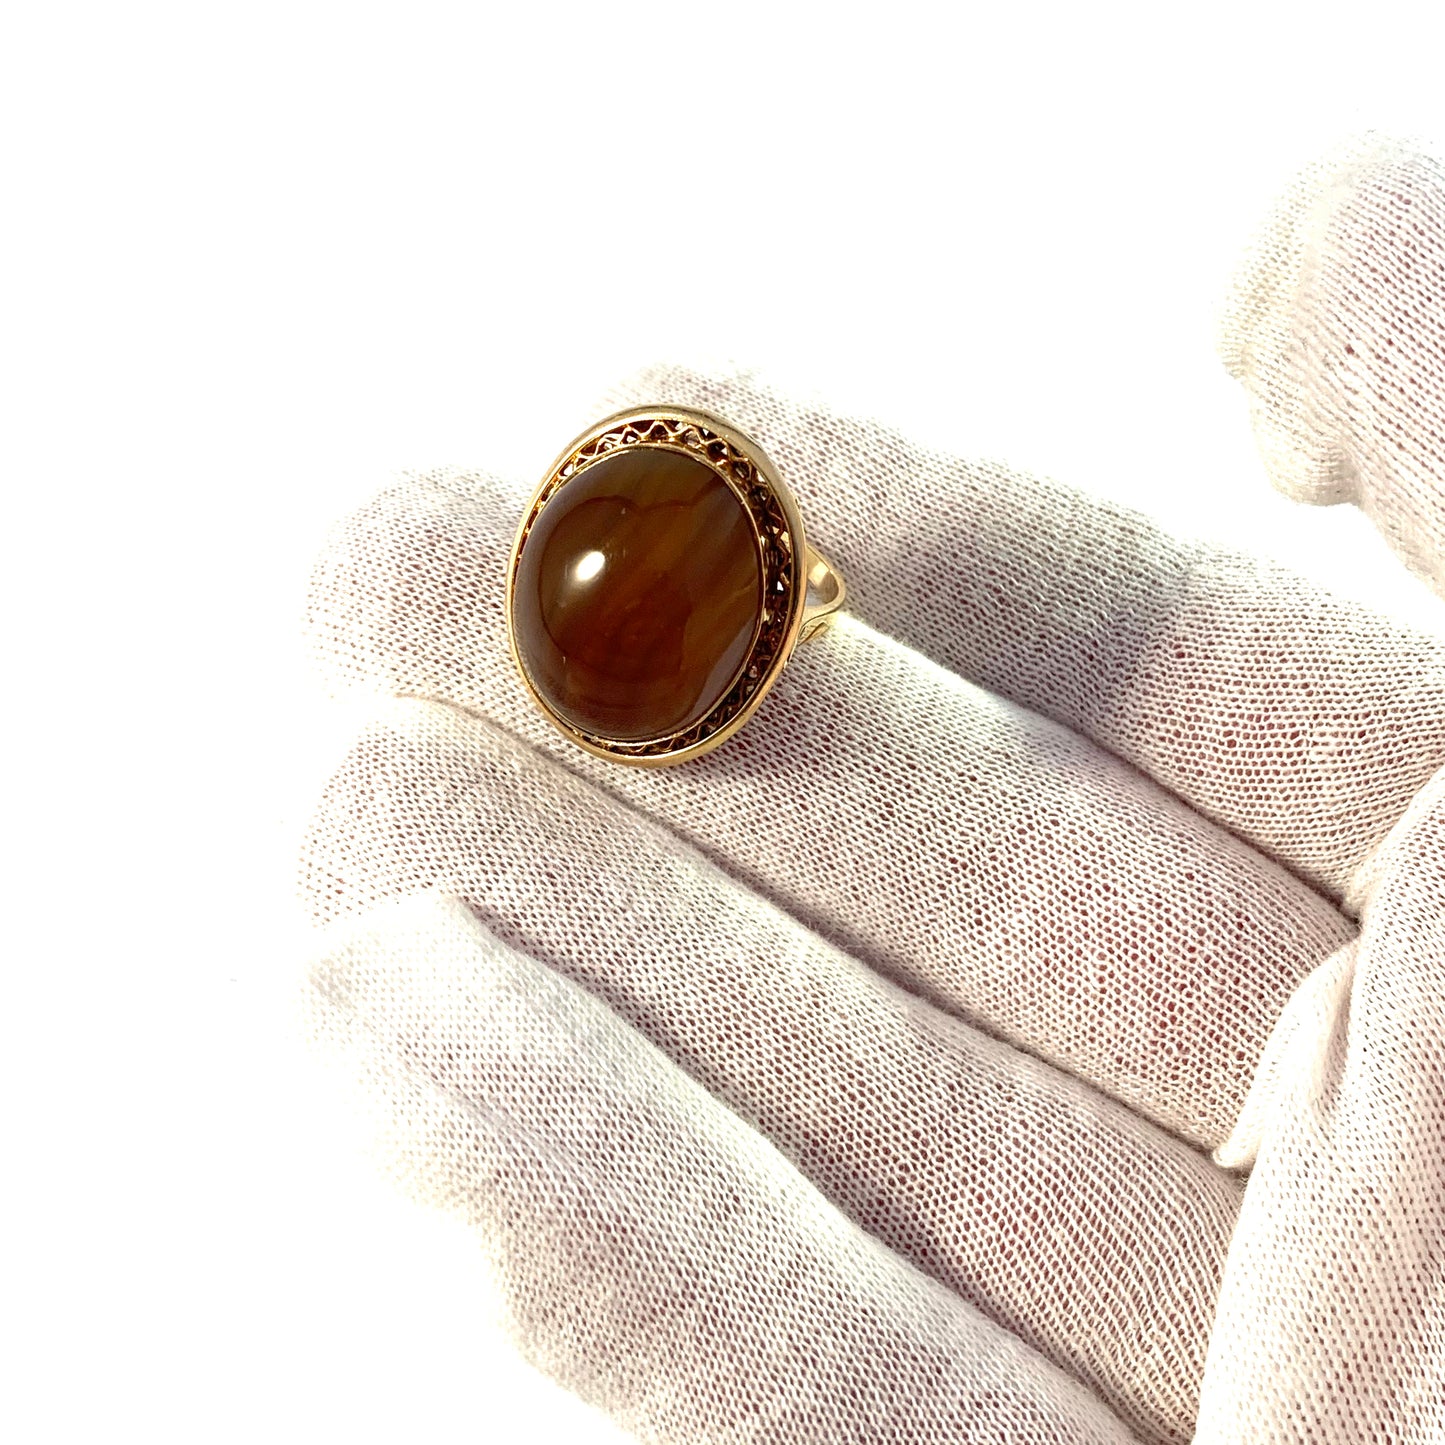 Vintage Mid Century 18k Gold Agate Cocktail Ring.